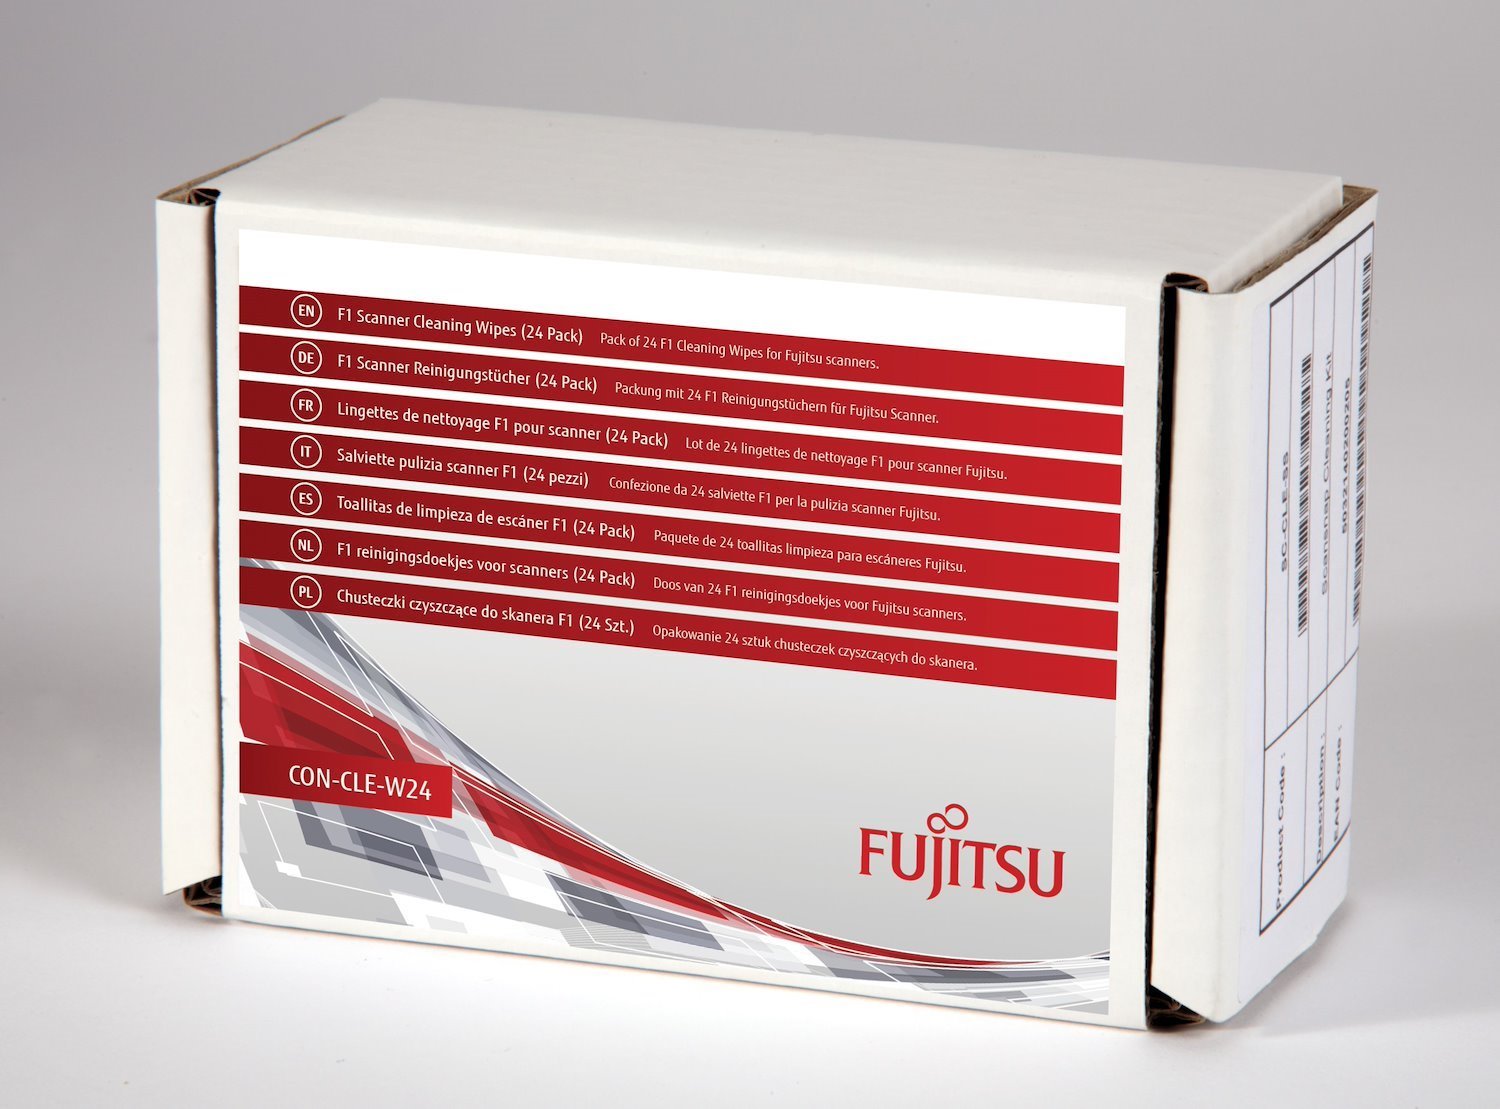 Fujitsu F1 Scanner Cleaning Wipes [24 Pack] (Con-Cle-W24 - Pack Of 24 F1 Cleaning Wipes For Fujitsu Scanners)